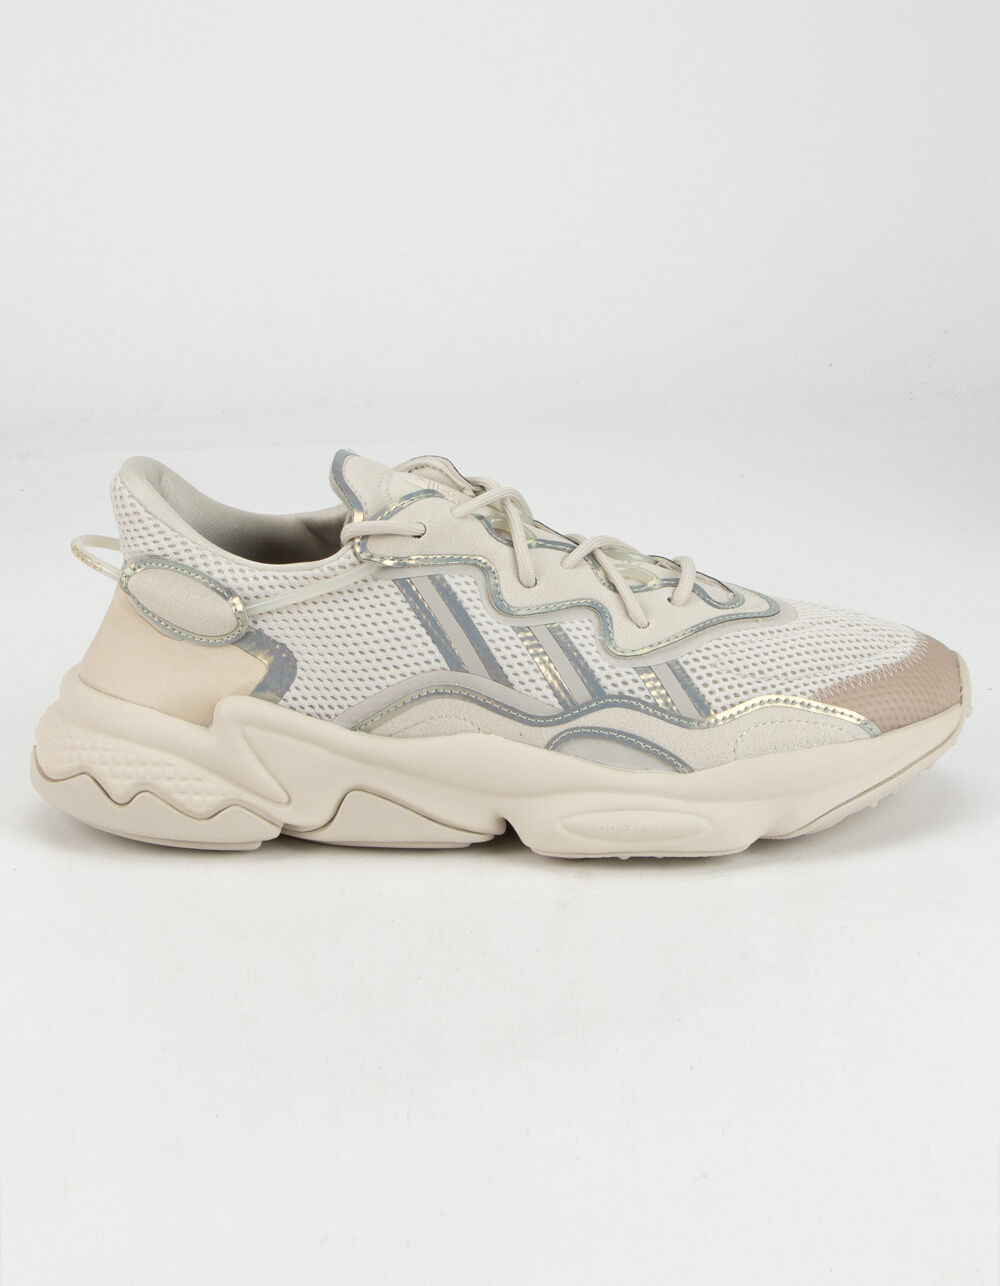 ADIDAS Ozweego Shoes - OFF WHITE | Tillys